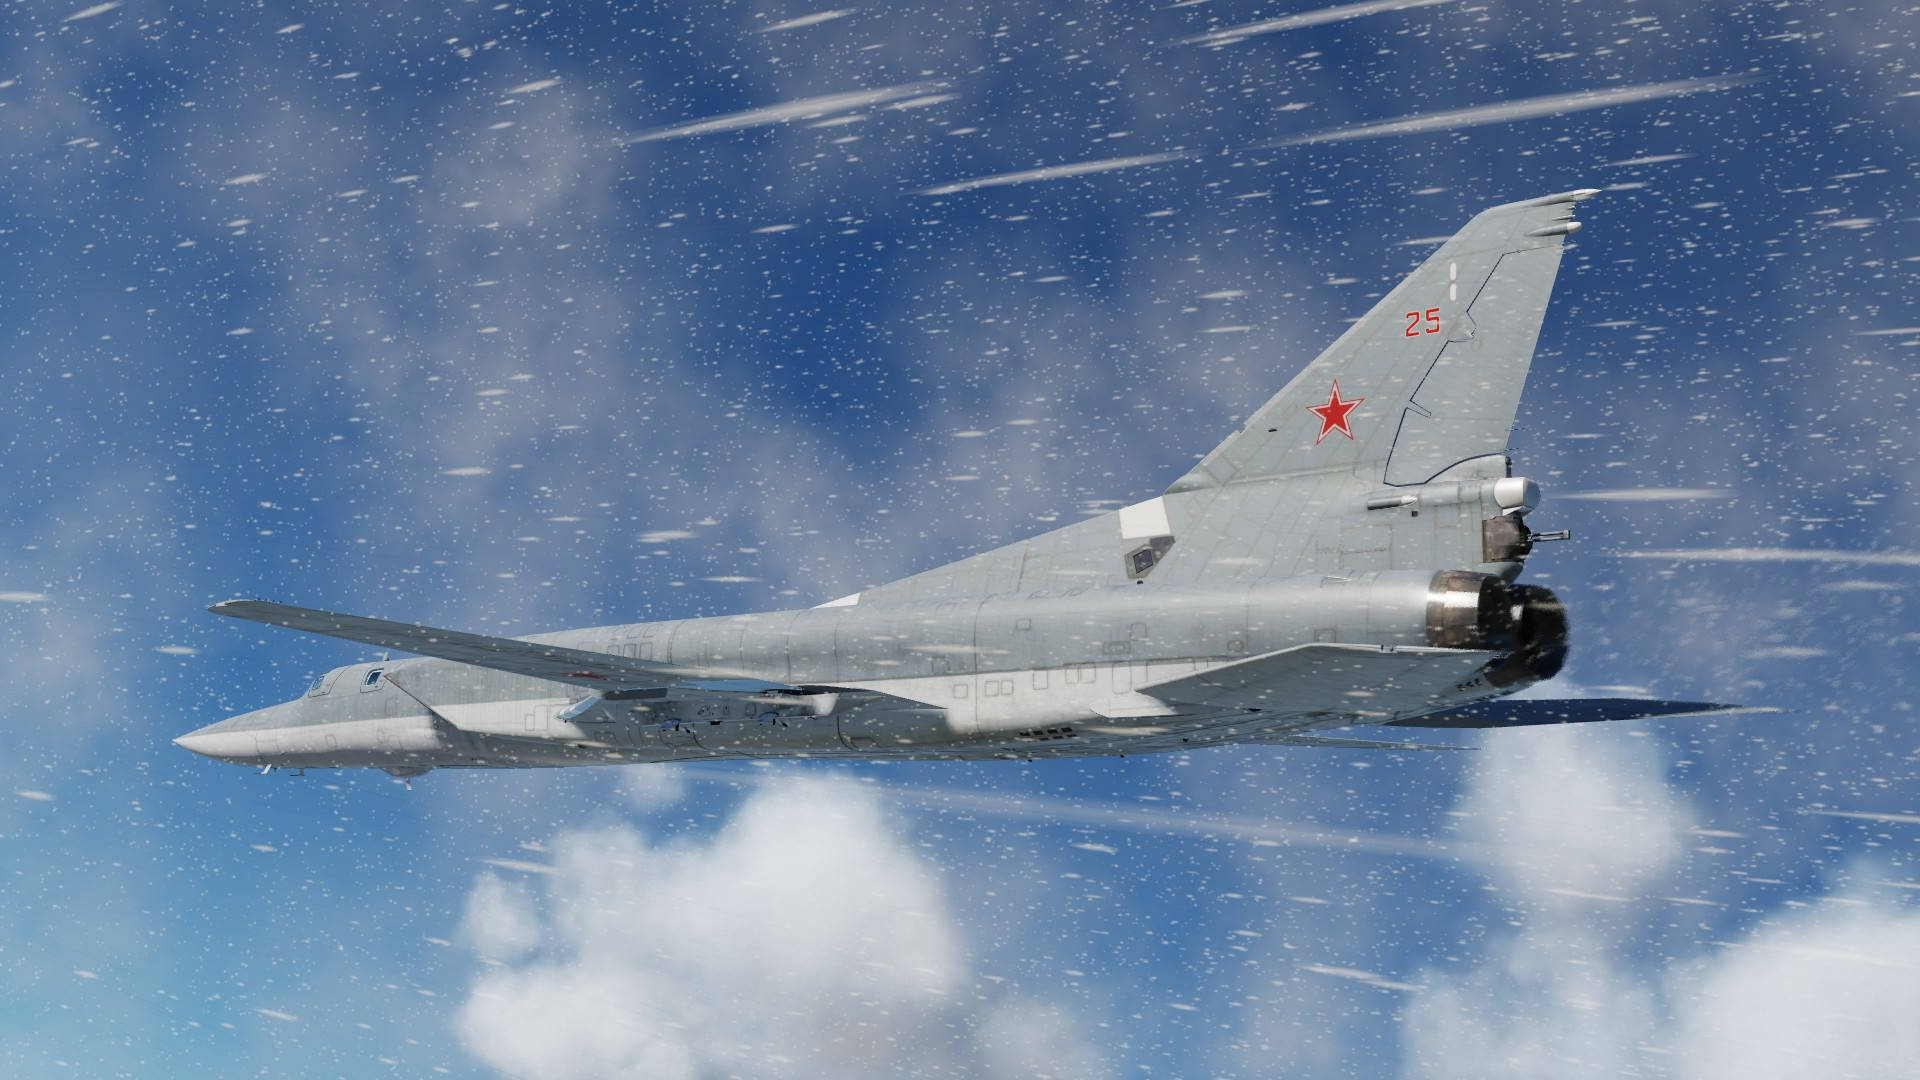 Hd Plane Flying With Snow Background